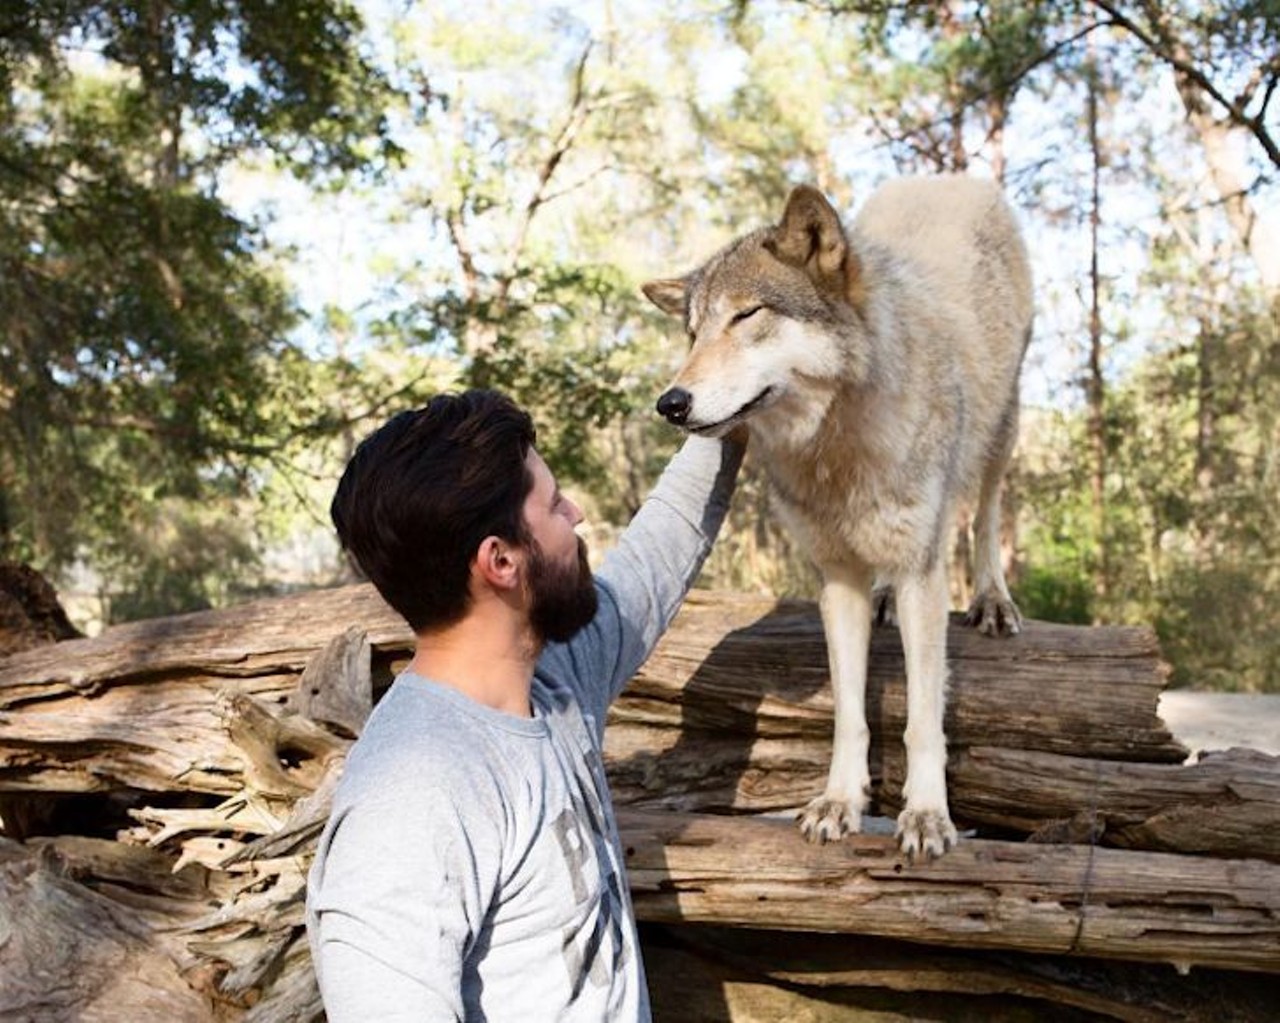 Seacrest Wolf Preserve
3449 Bonnett Pond Road, Chipley, (850) 773-2897
It&#146;s hard to think of many things more awesome than hanging out with a pack of wolves in their natural habitat. These pups might even give you the perfect souvenir&#151;a slobbery wolf kiss.  
Photo via danventure/Instagram